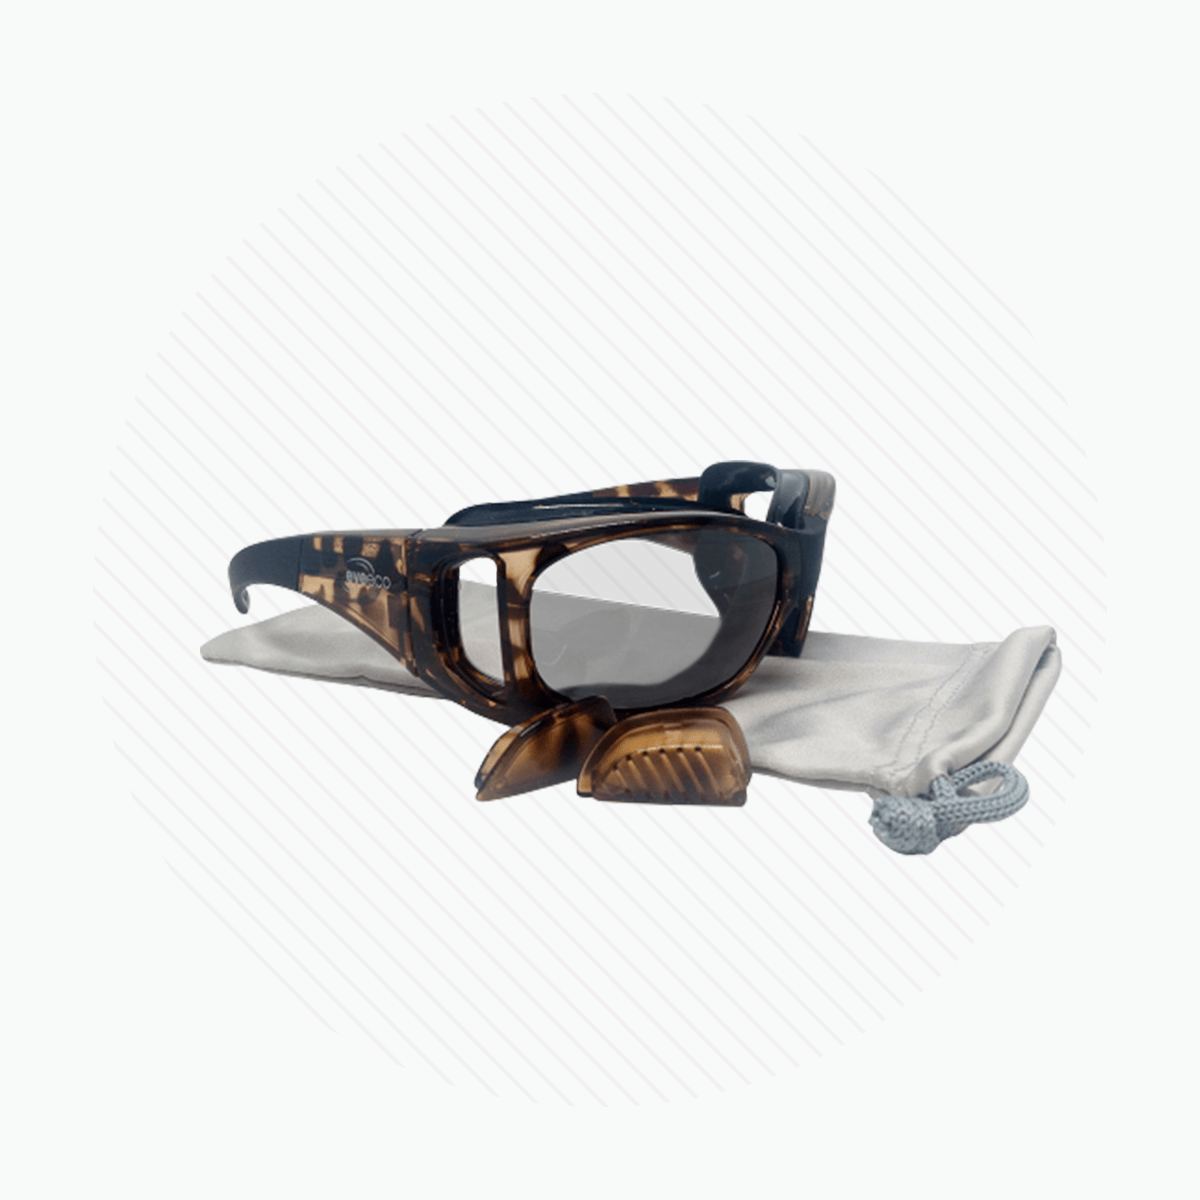 EyeEco Small Moisture Release Eyewear- (Red Tortoise with Clear Lens) - Dryeye Rescue